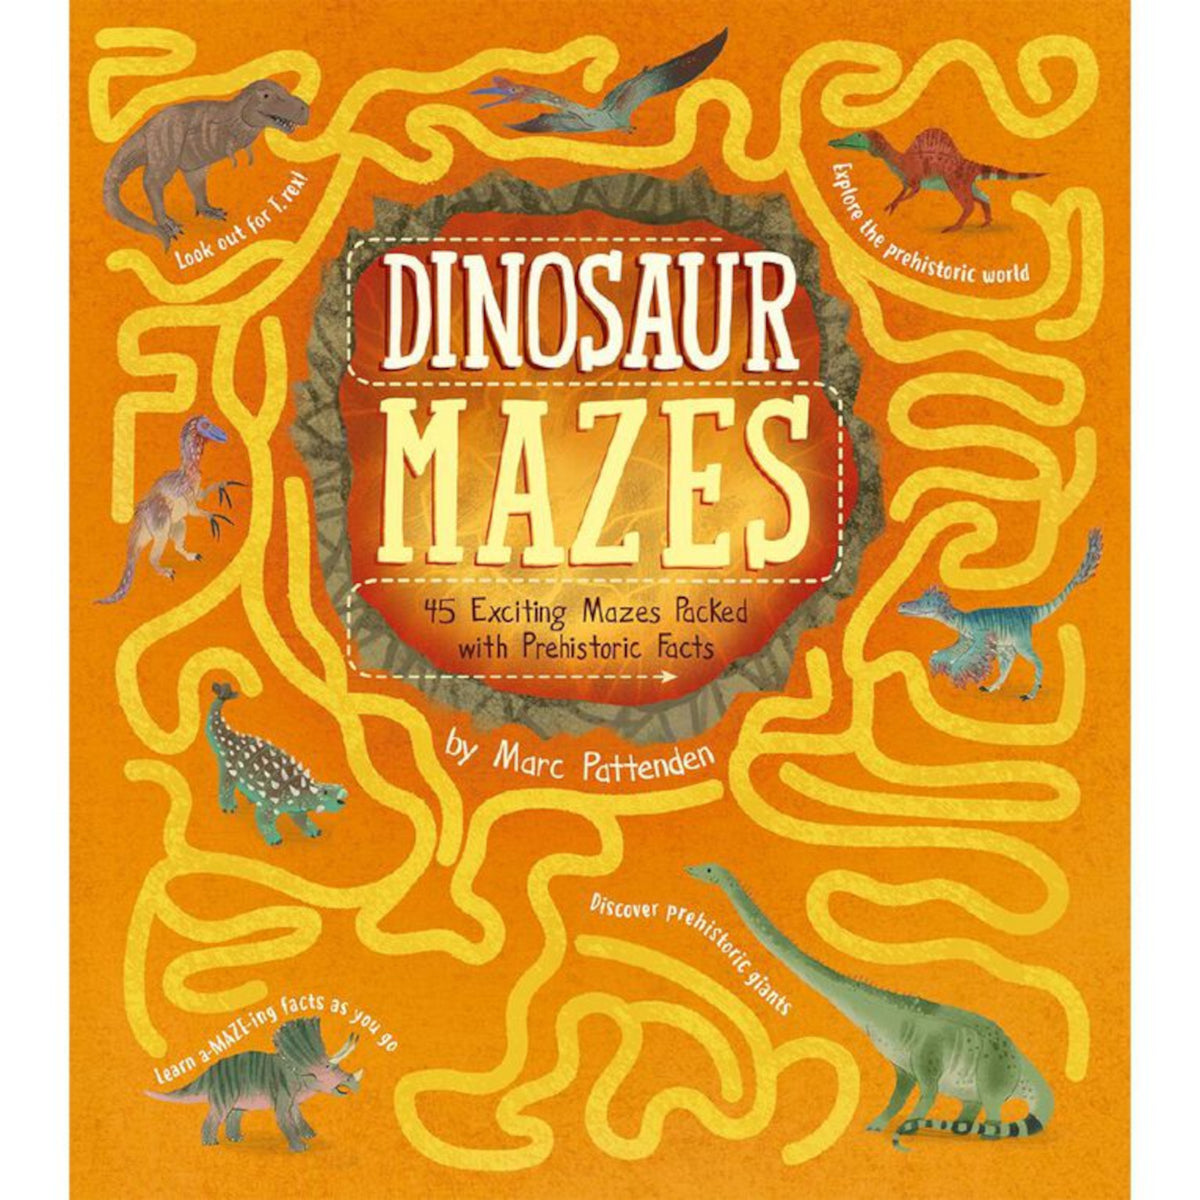 Dinosaur Mazes : 45 Exciting Mazes Packed with Prehistoric Facts